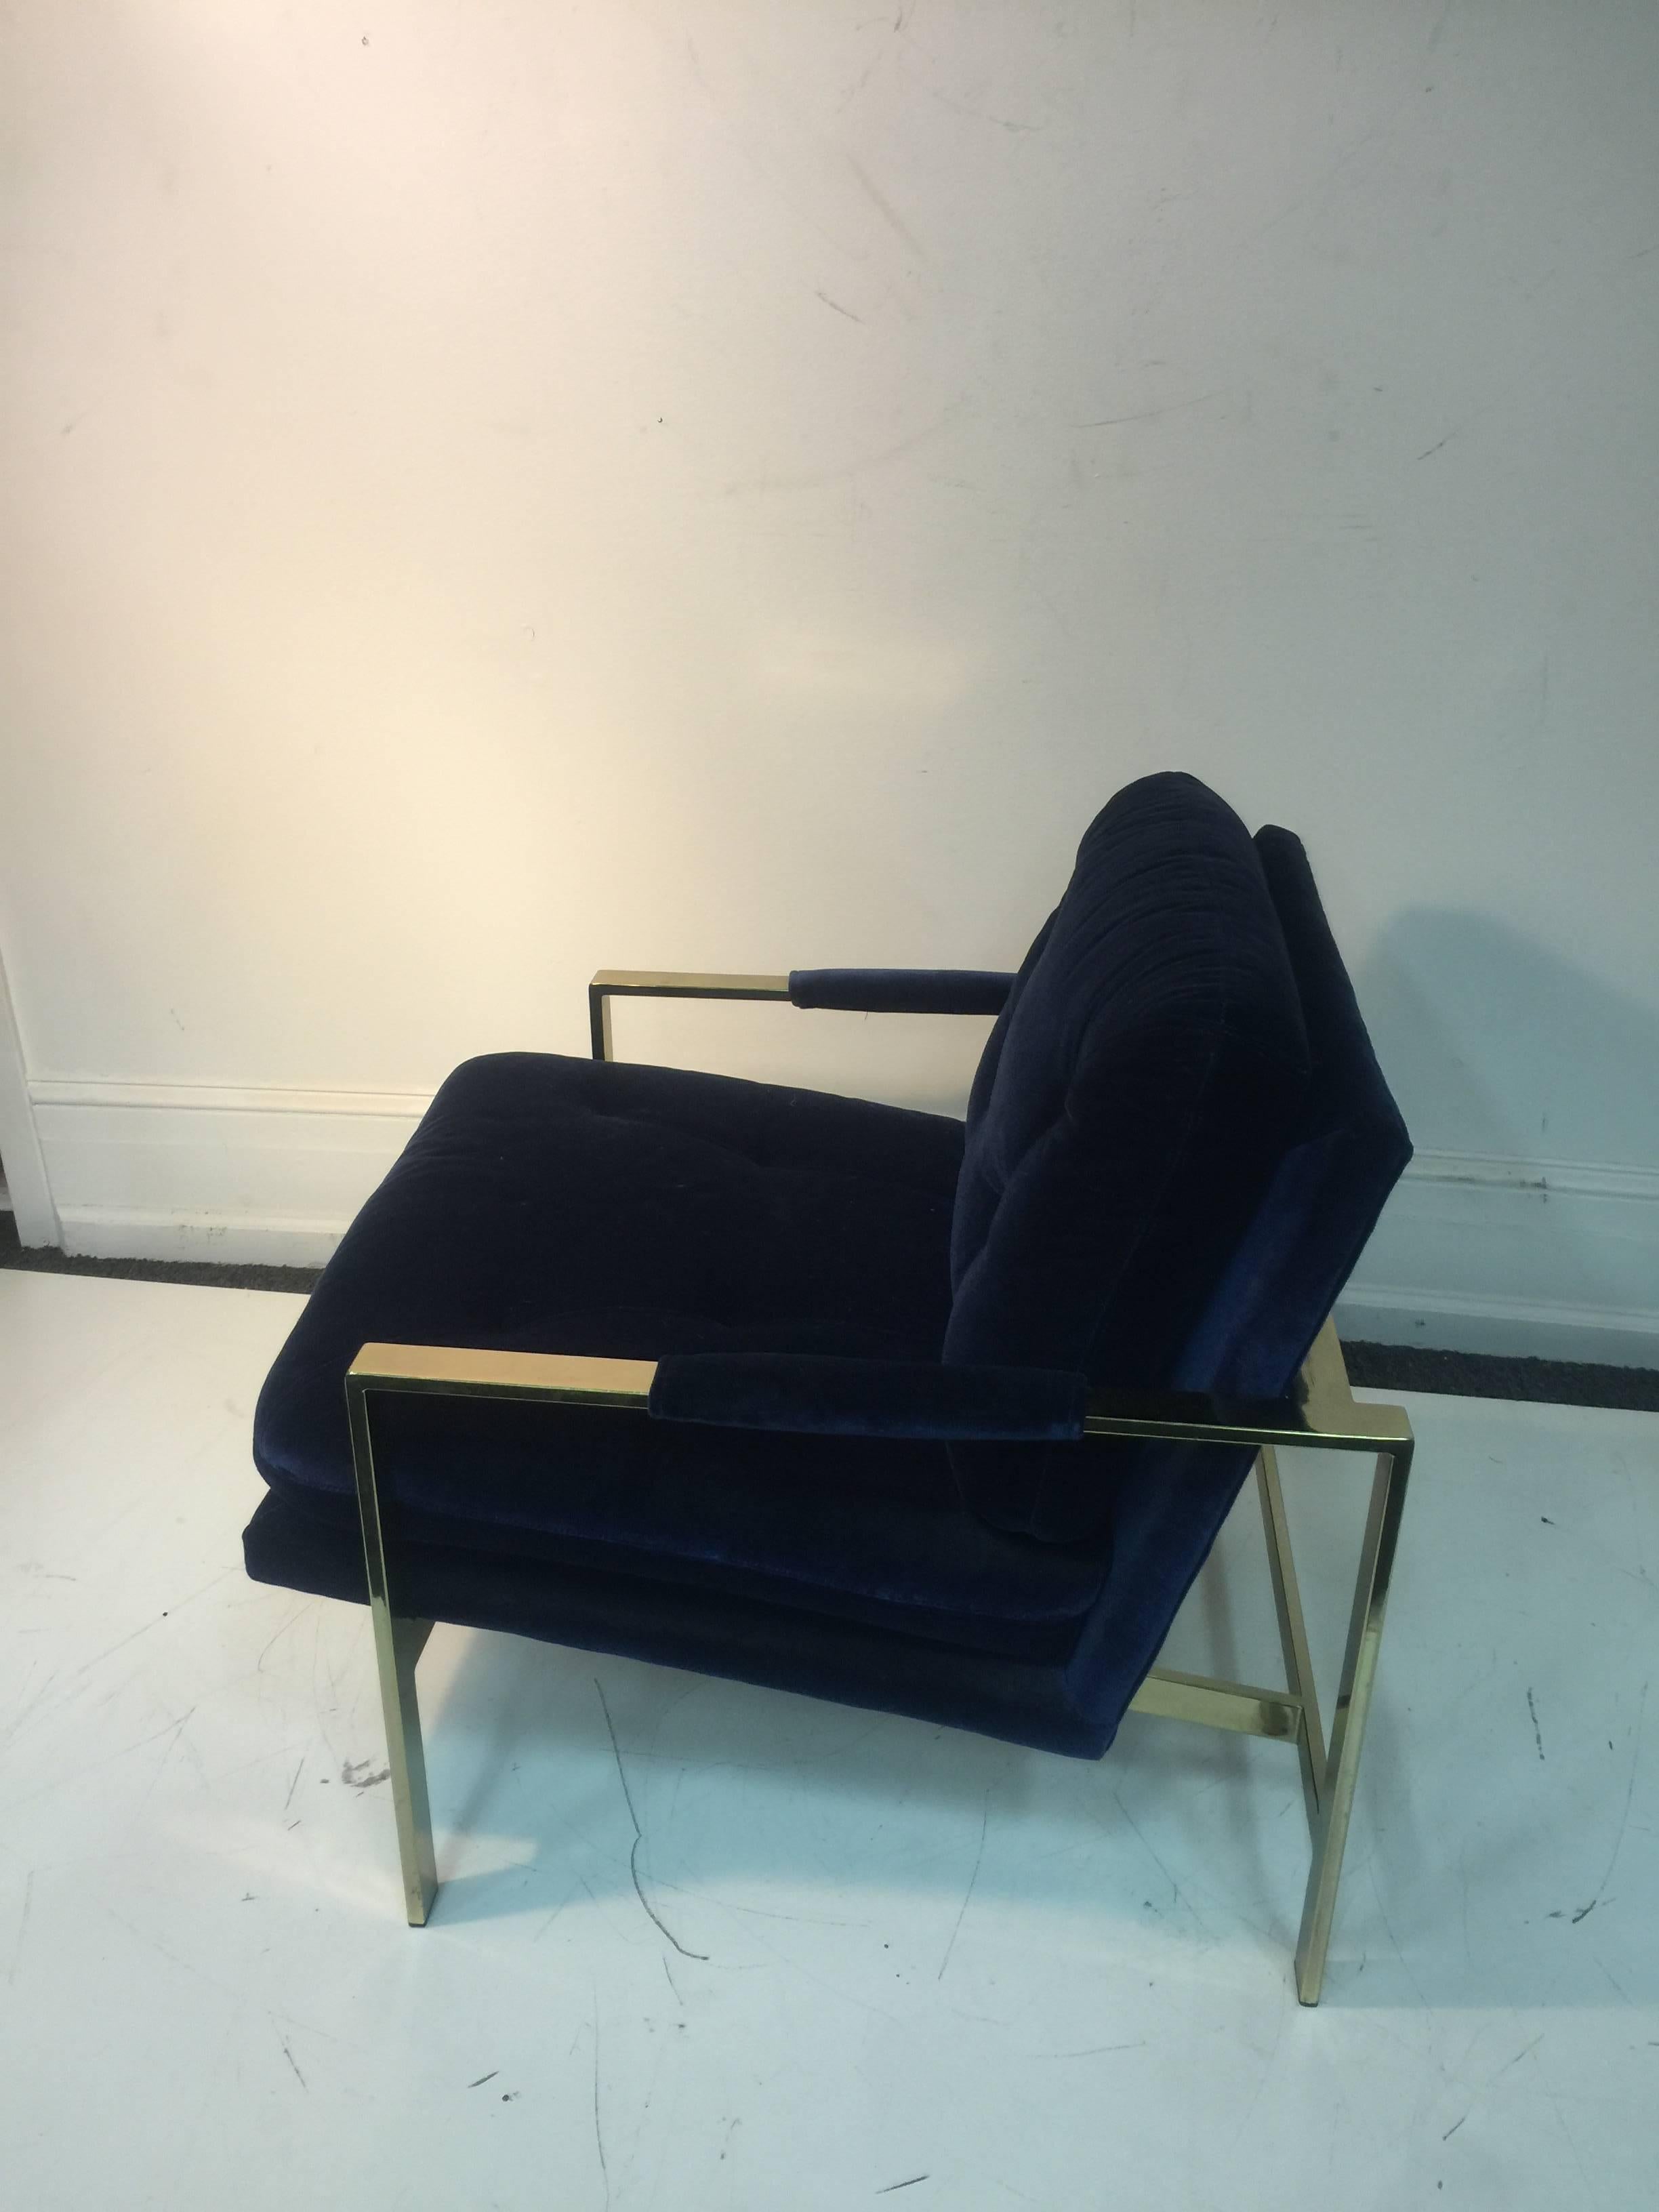 20th Century Luxurious Milo Baughman Lounge Chair Upholstered in Lush Blue Velvet For Sale